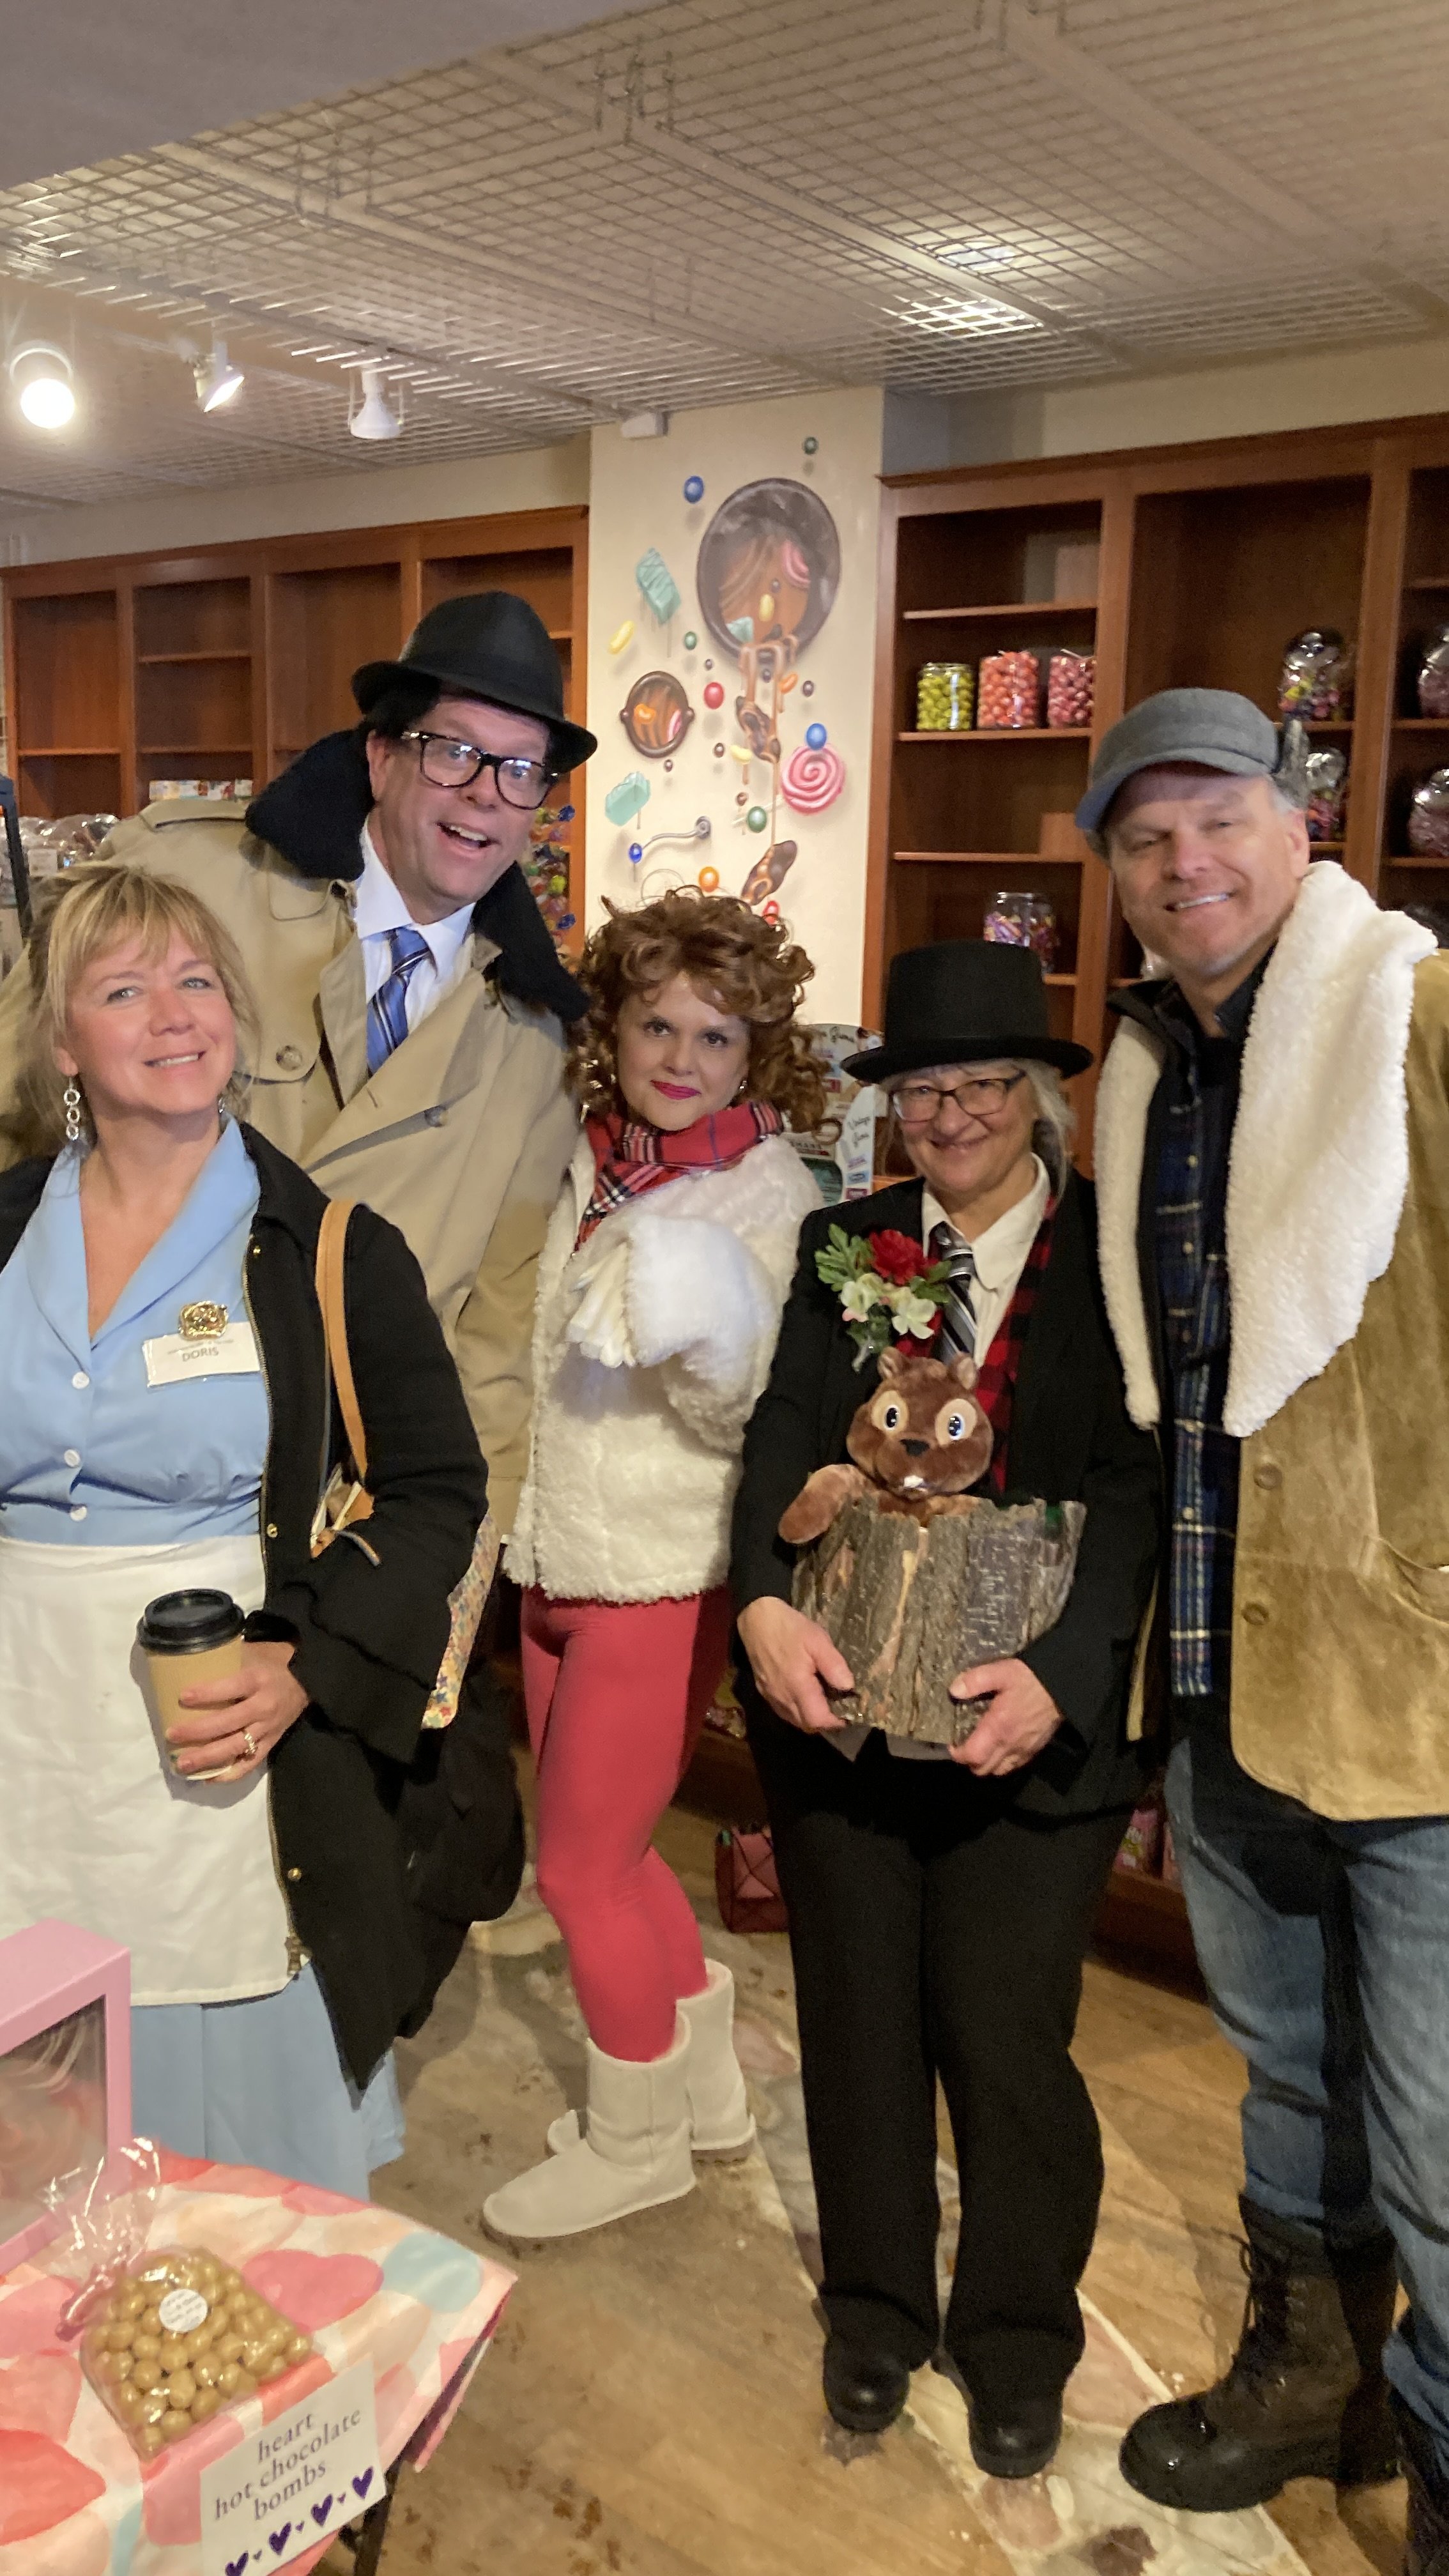  We bumped into this crew of incredible  Groundhog Day  cosplayers, which apparently is a thing! 